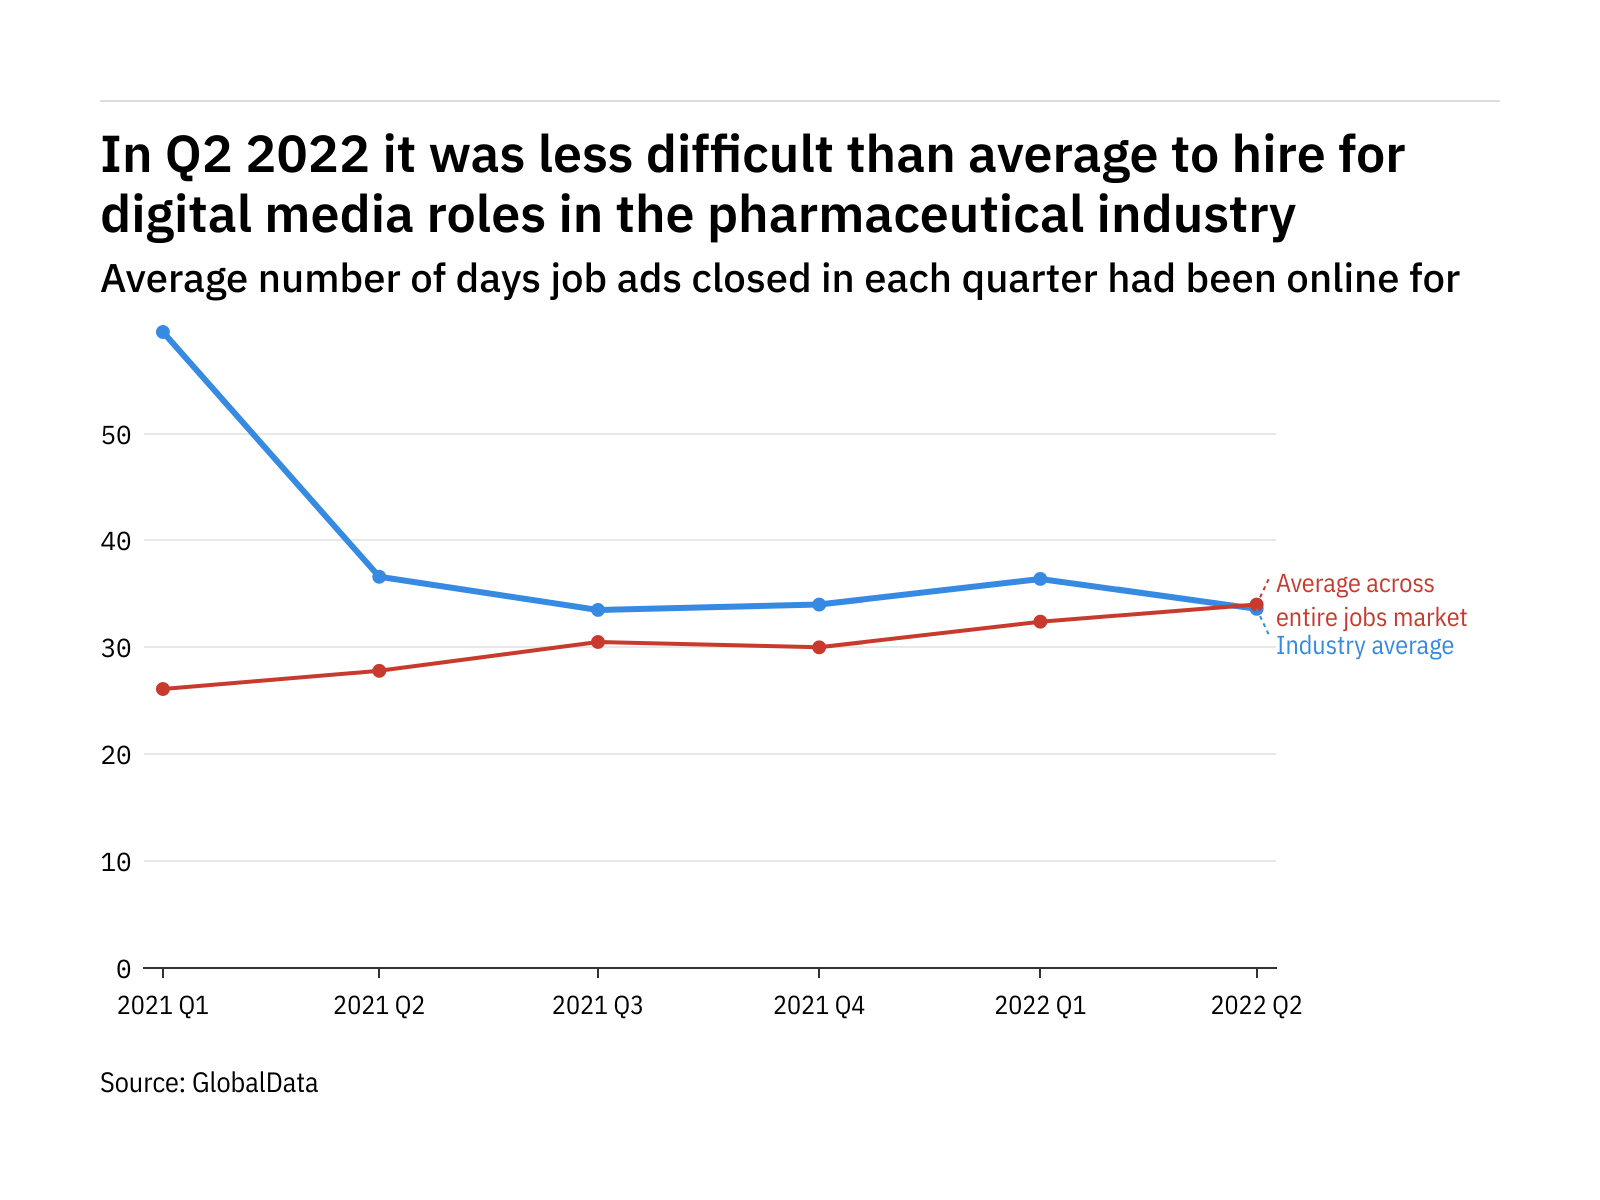 The pharmaceutical industry found it easier to fill digital media vacancies in Q2 2022